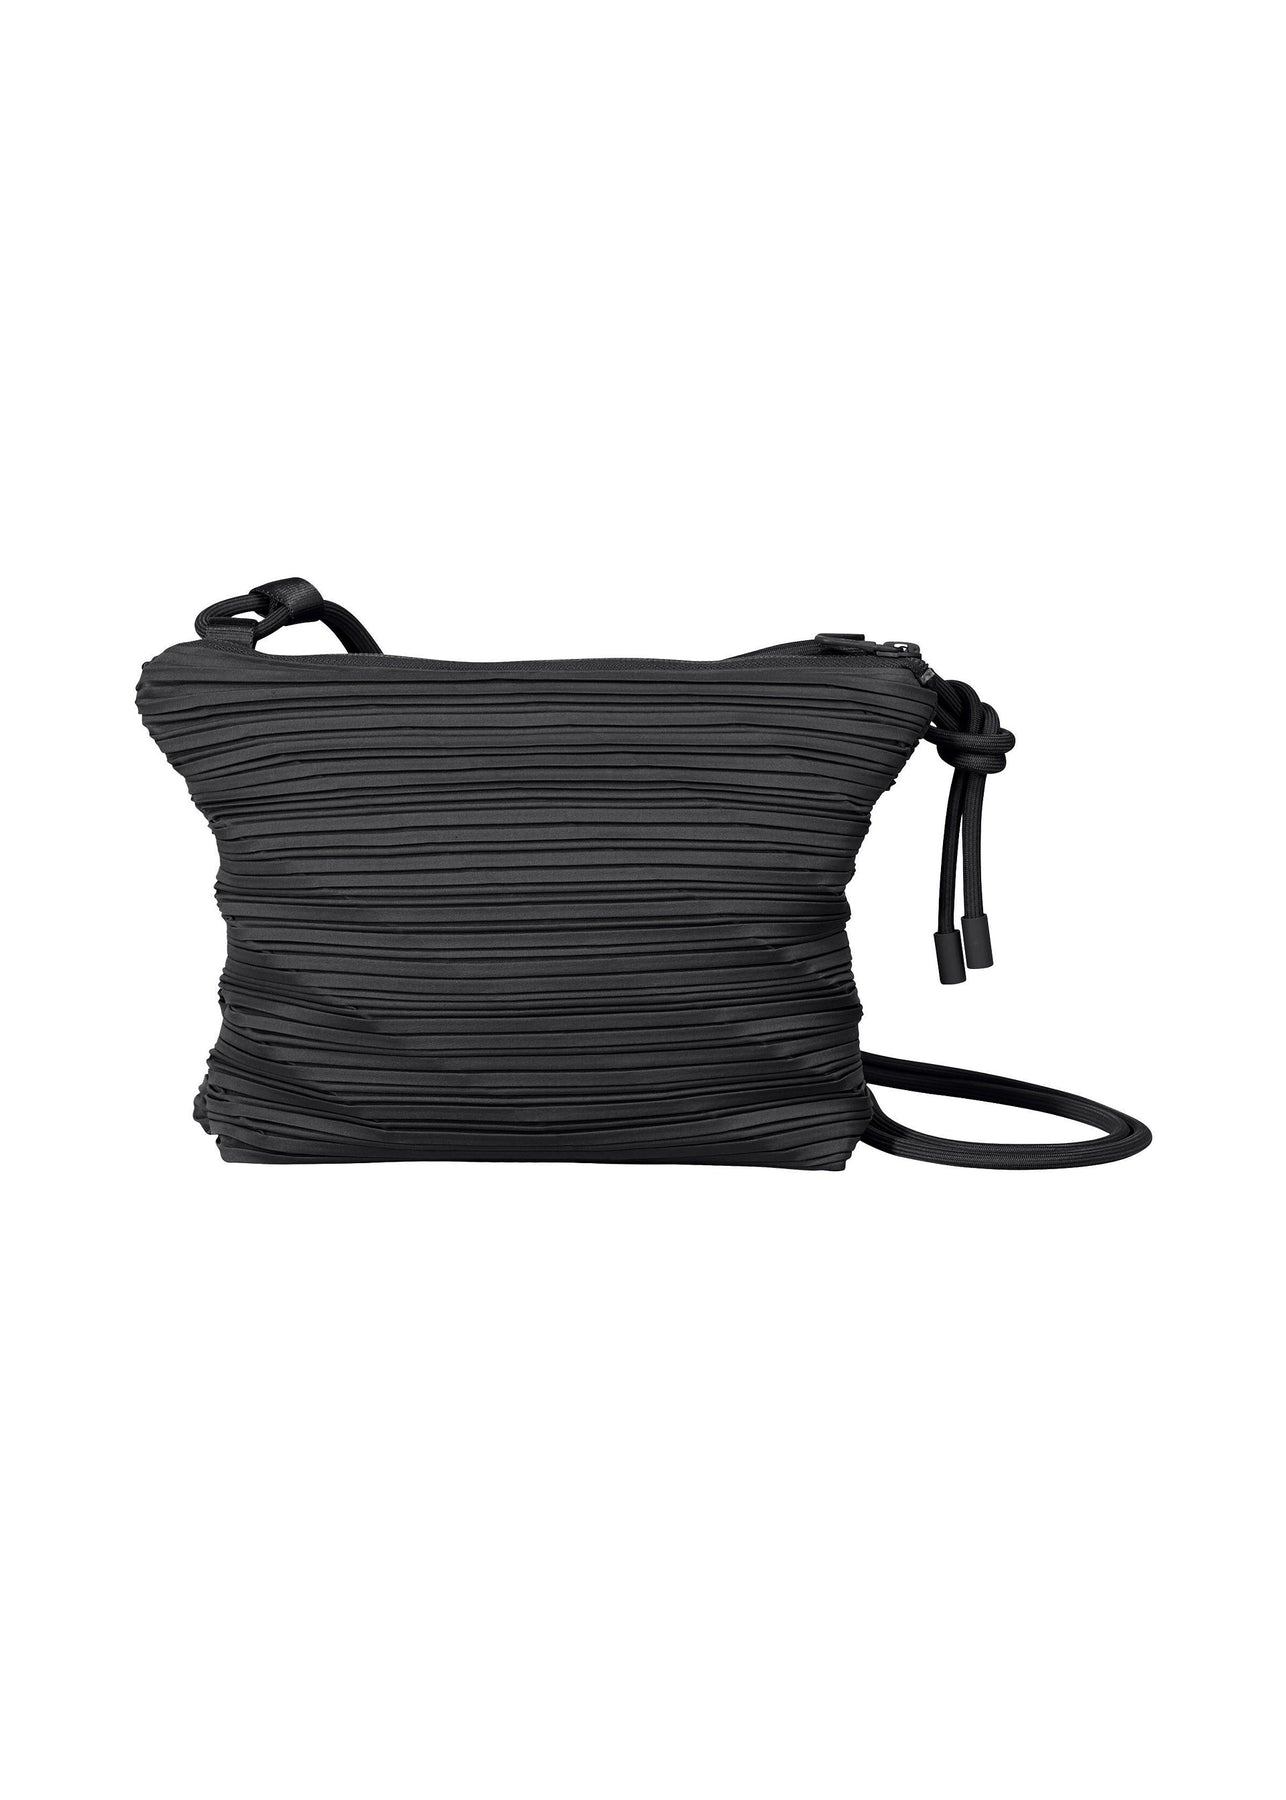 PATAPATA PLEATS BAG | The official ISSEY MIYAKE ONLINE STORE